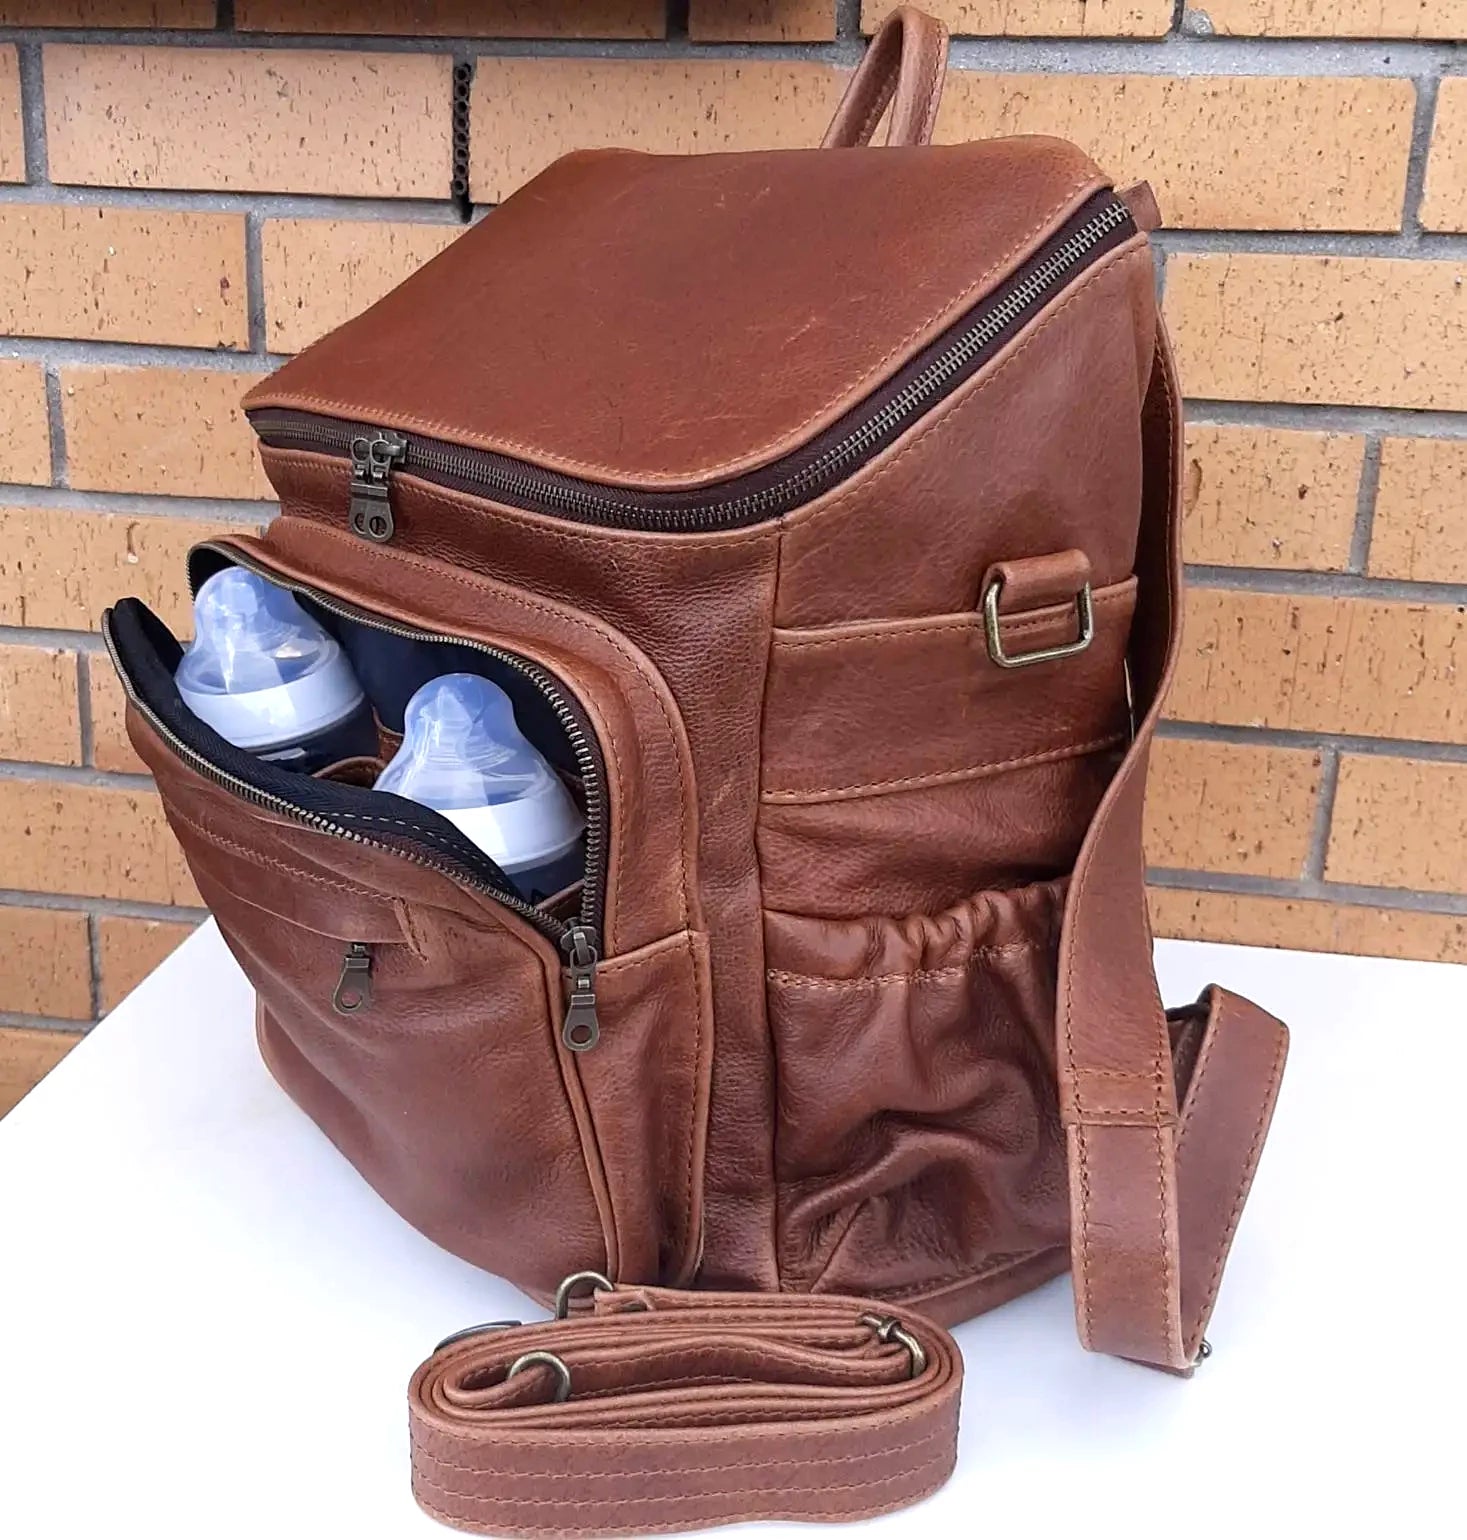 A beautiful baby backpack  in Pecan tan colour made by Cape Masai Leather with 2 baby bottles in the front pocket